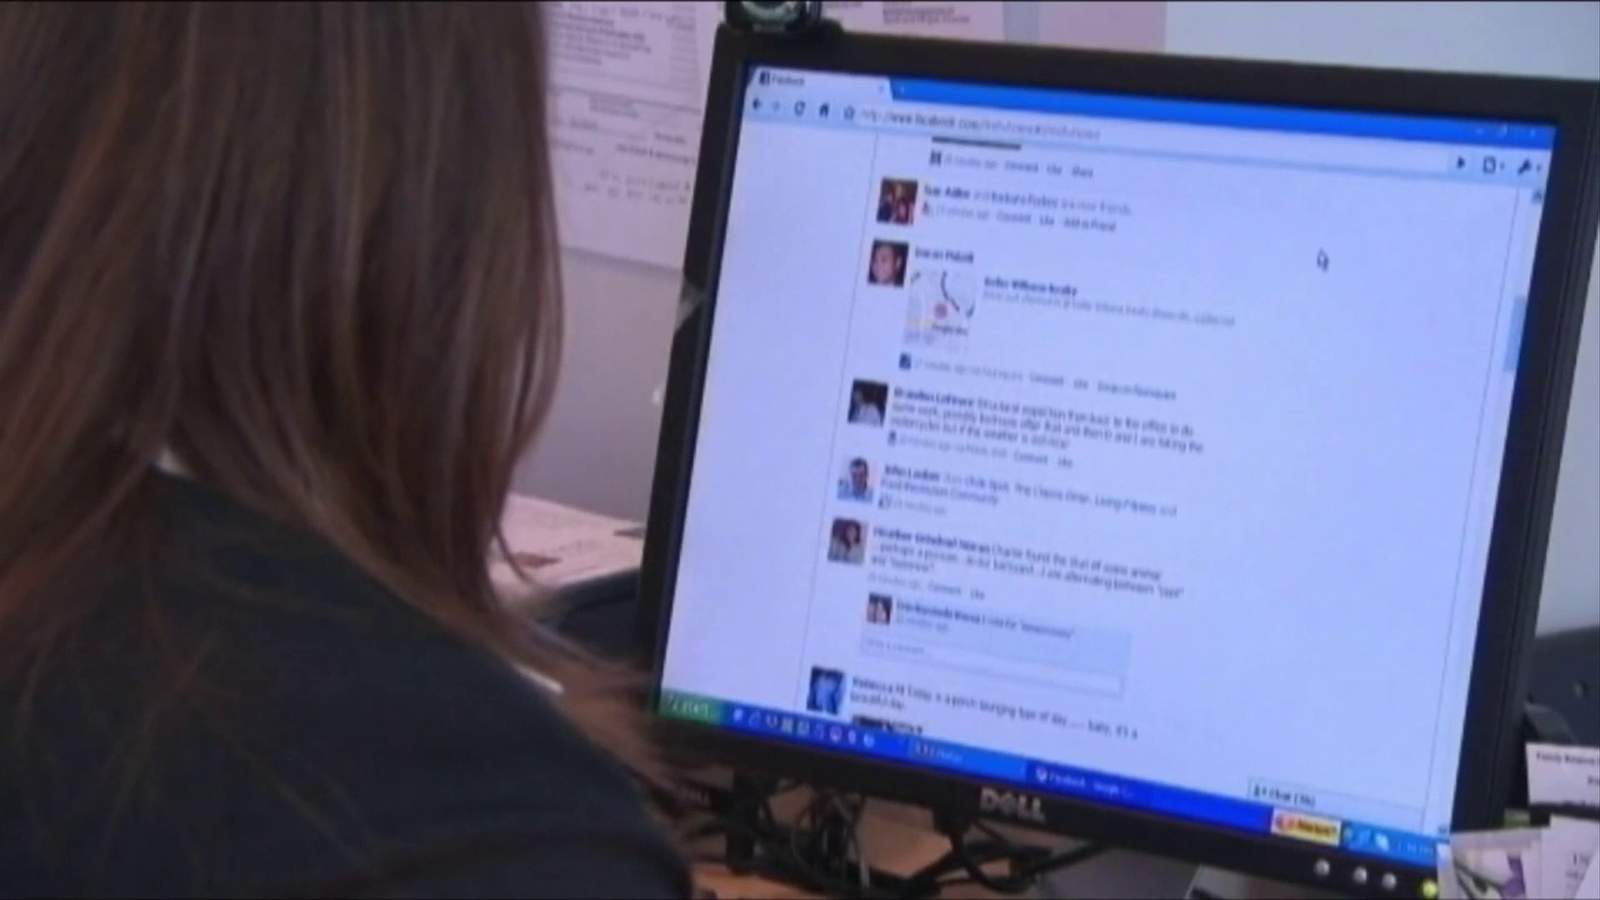 Expert weighs in on how to spot misinformation on social media